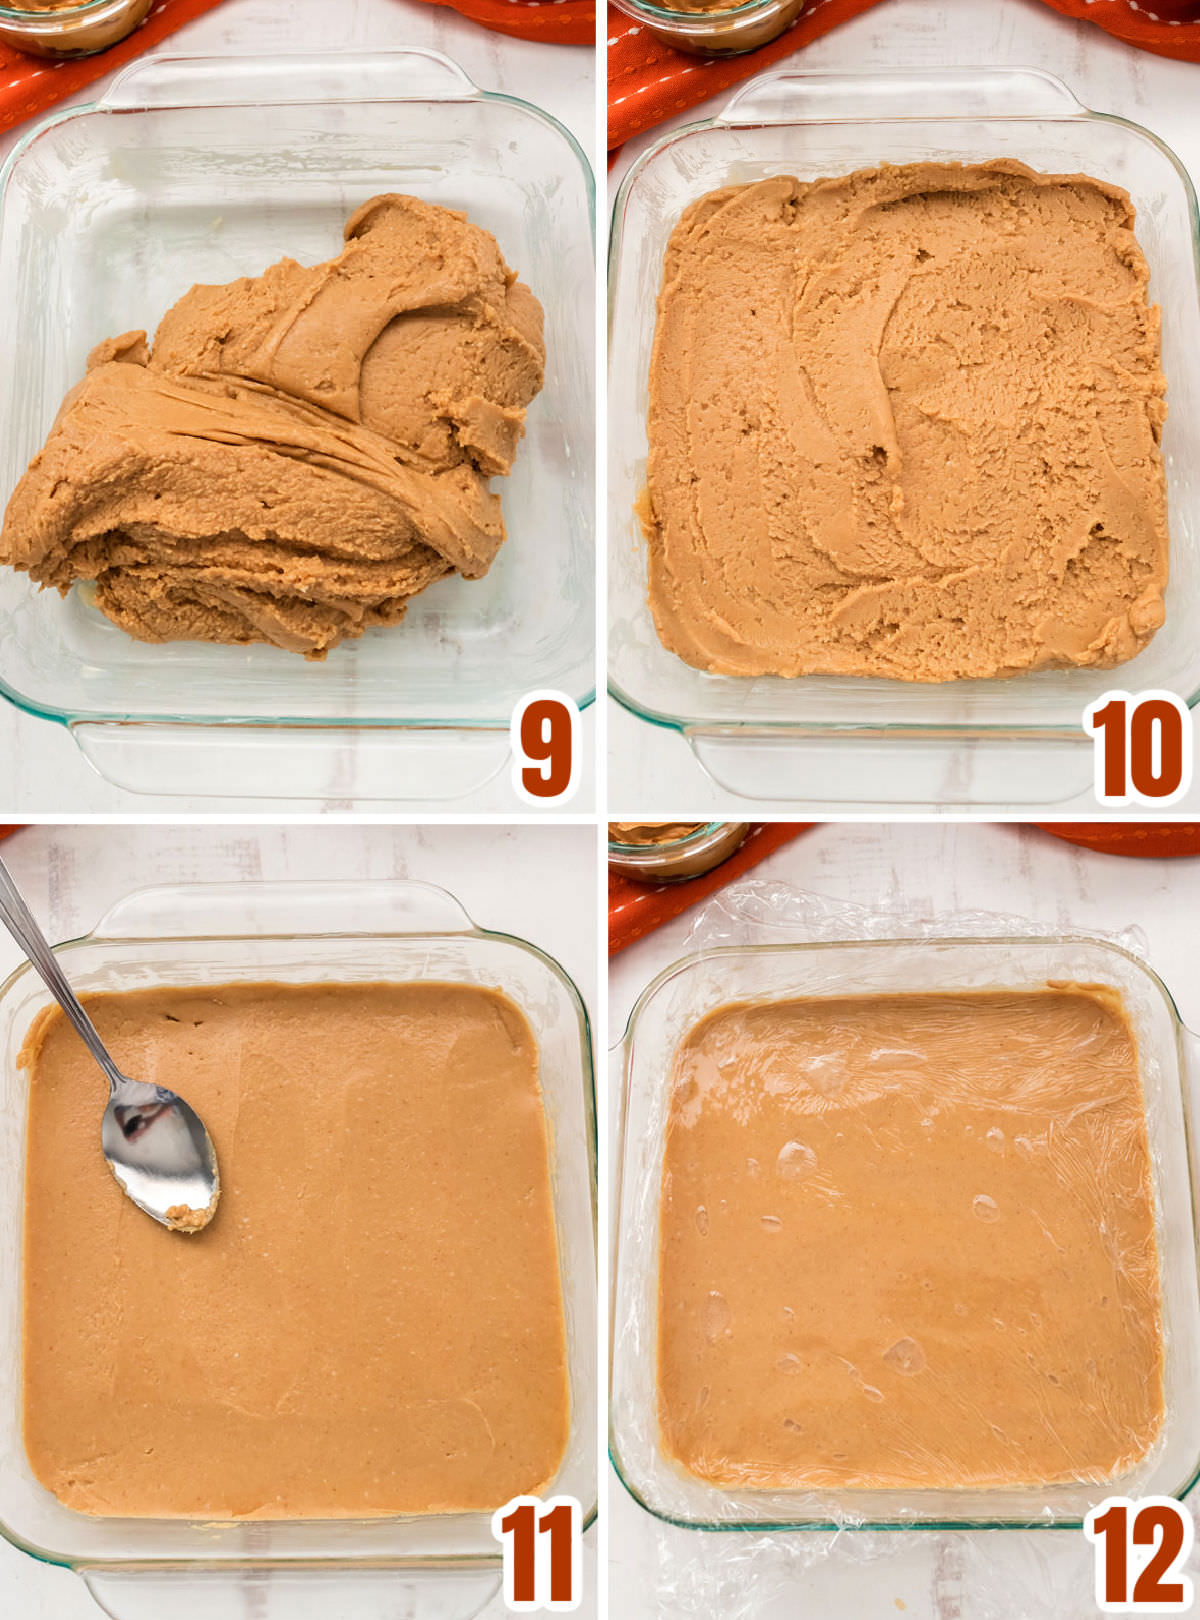 Collage image showing the steps for pressing the fudge down into the pan.